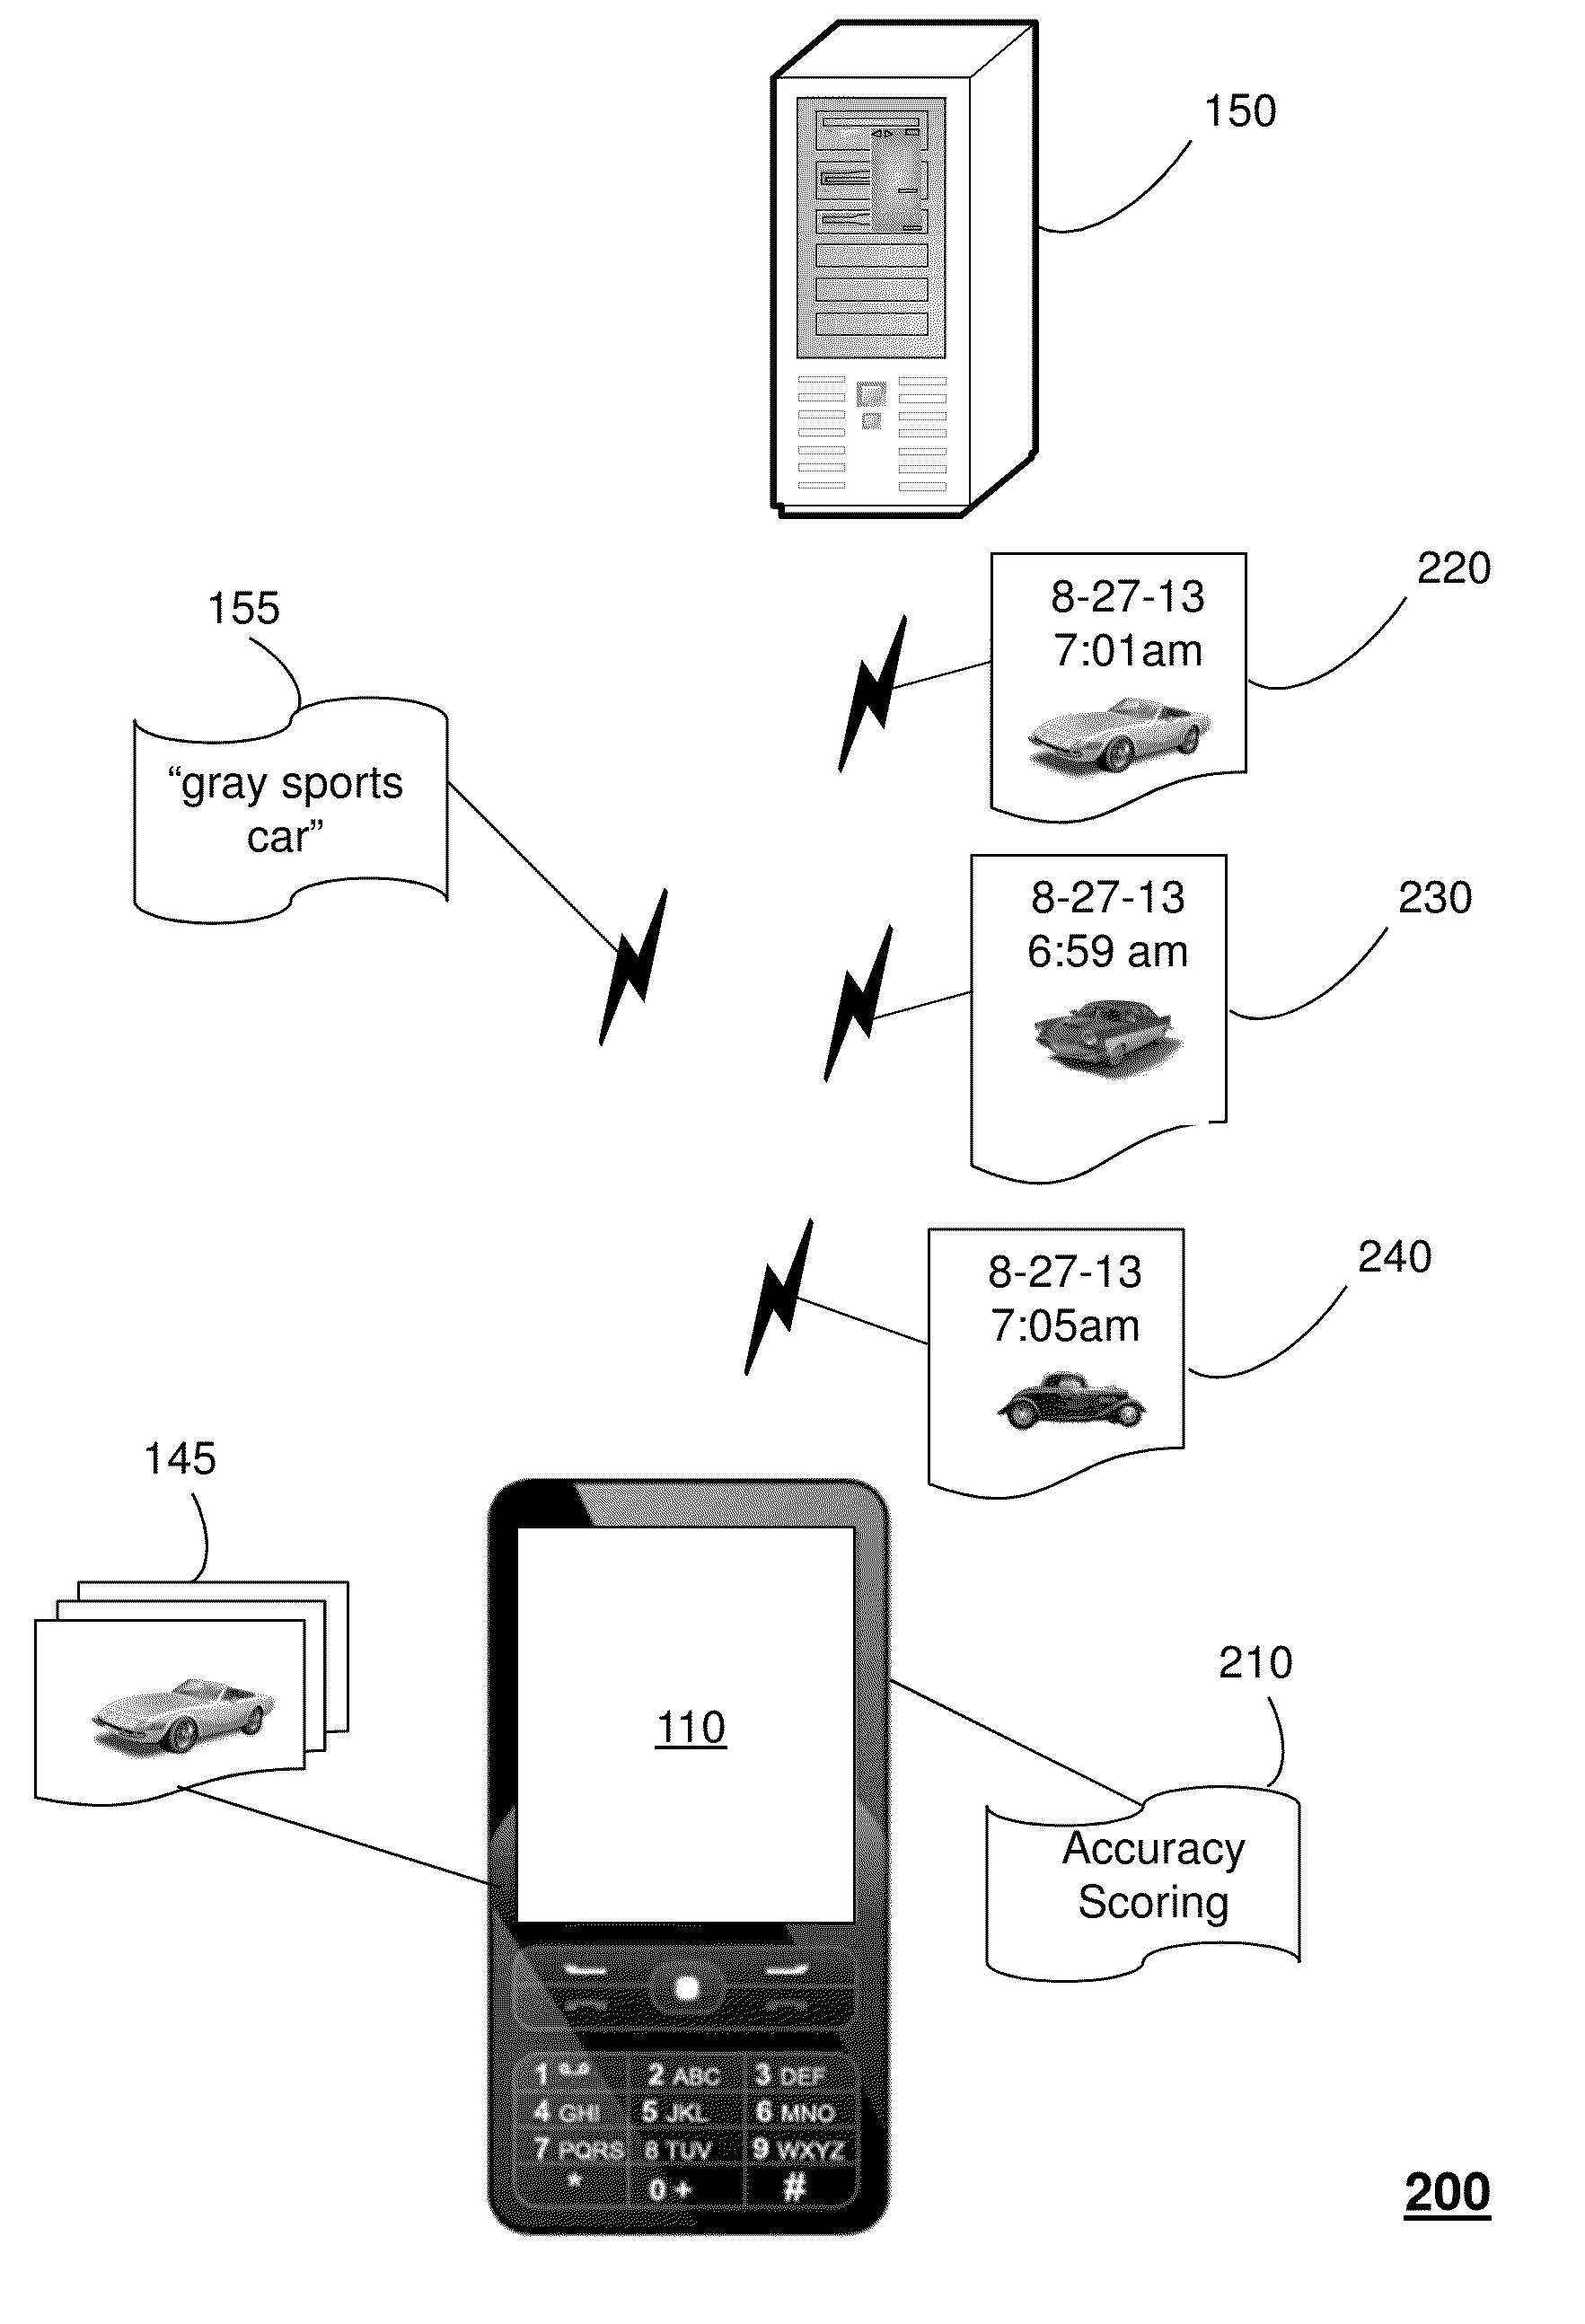 Method and apparatus for image collection and analysis